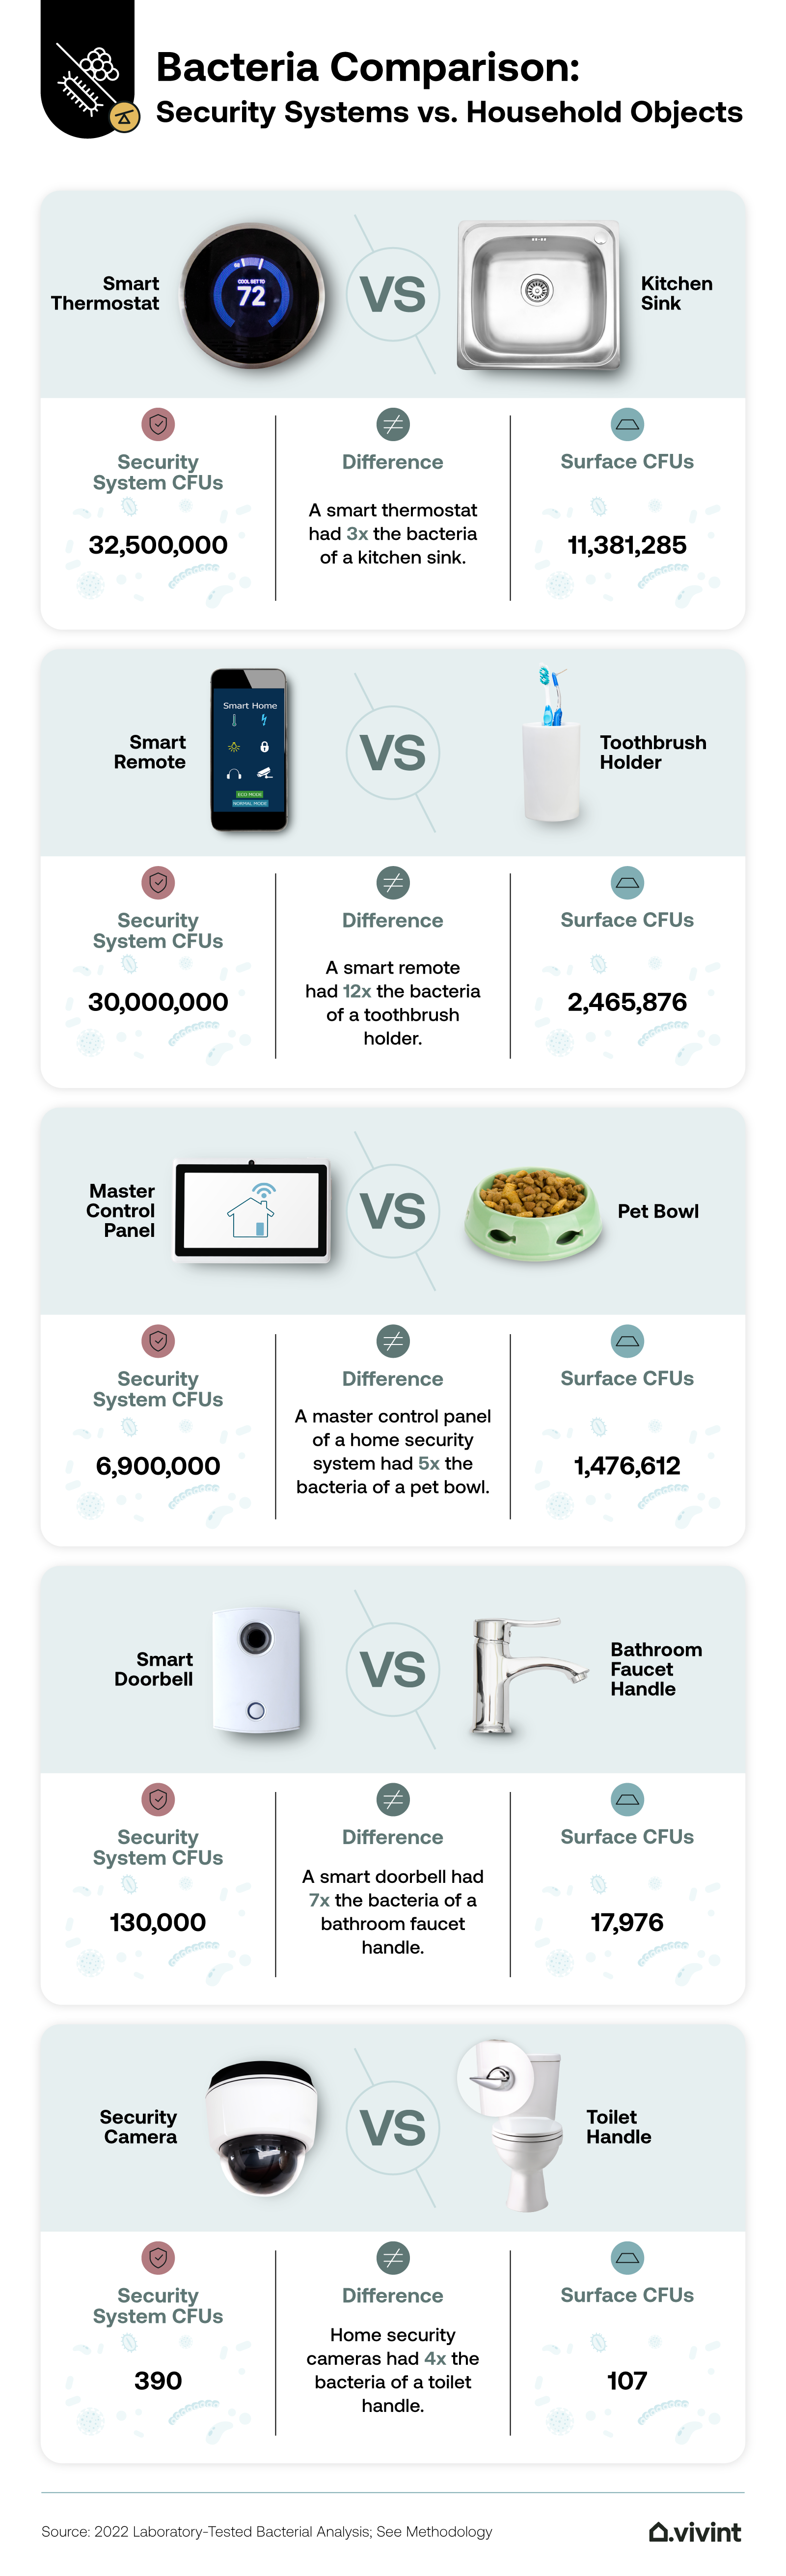 Information about how much bacteria is on home security devices versus common household items.